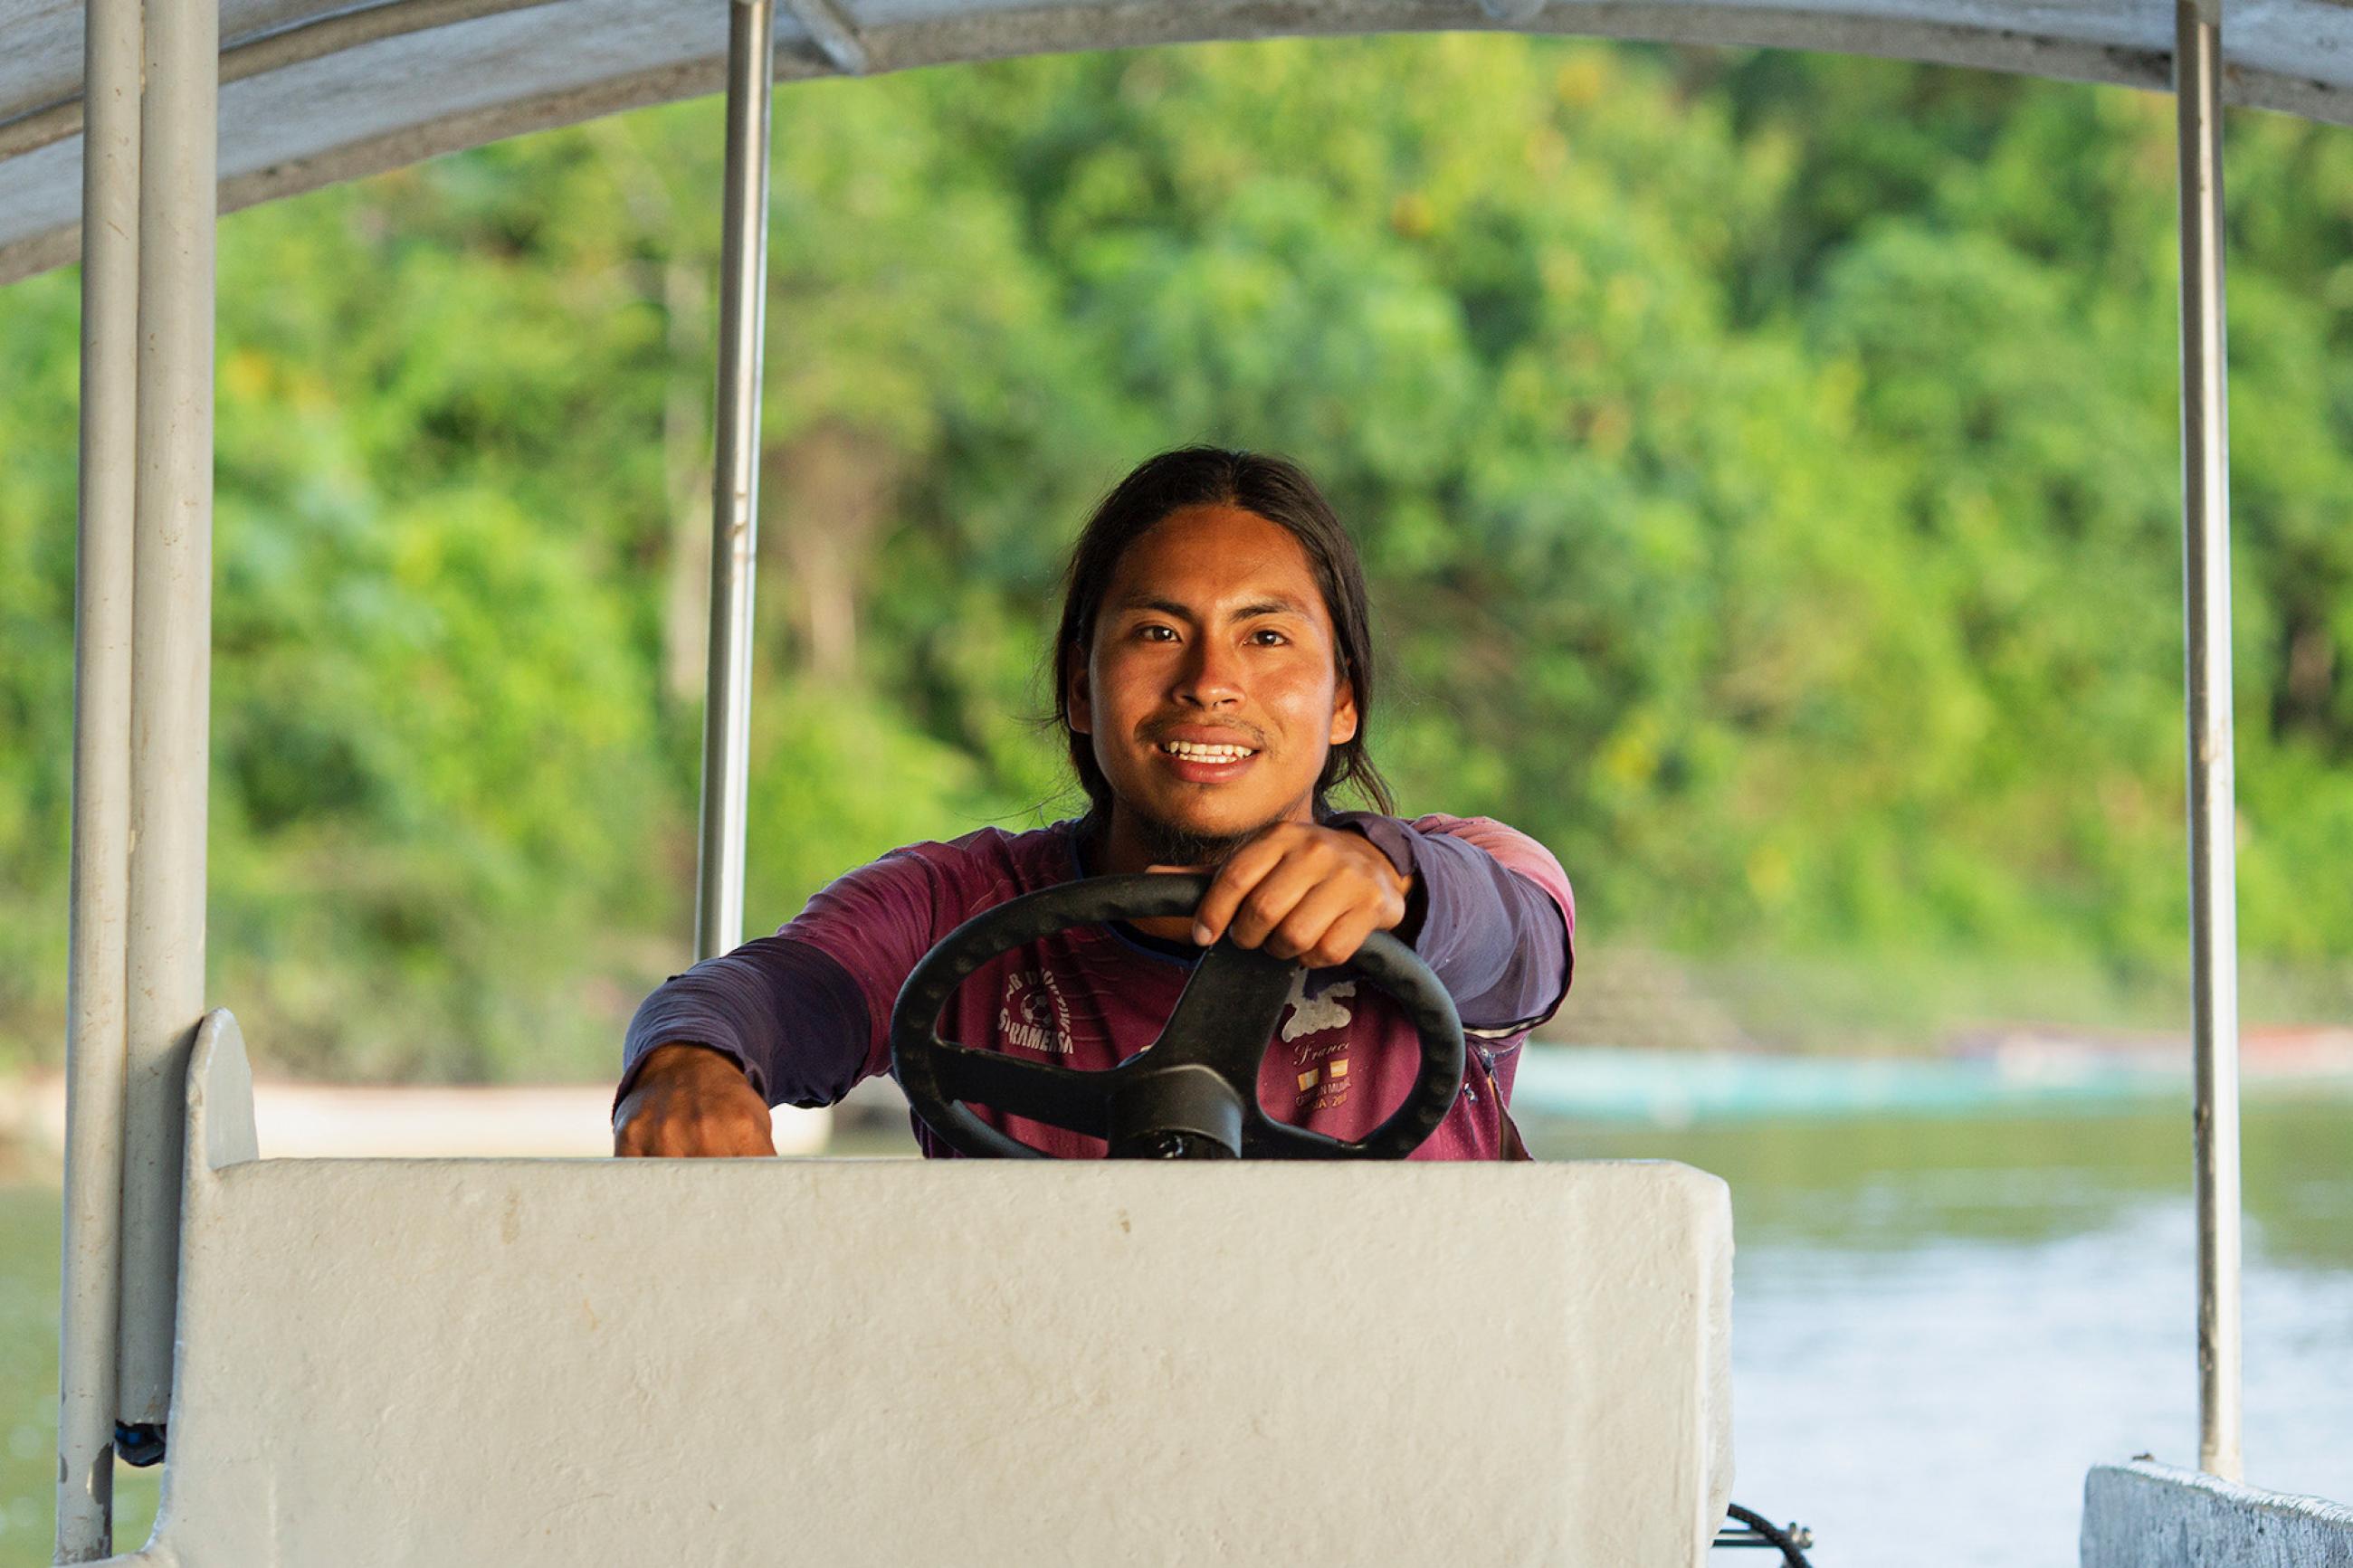 Luciano Peas, a member of the Achuar Indigenous community in Ecuador, captains a solar-powered boat.